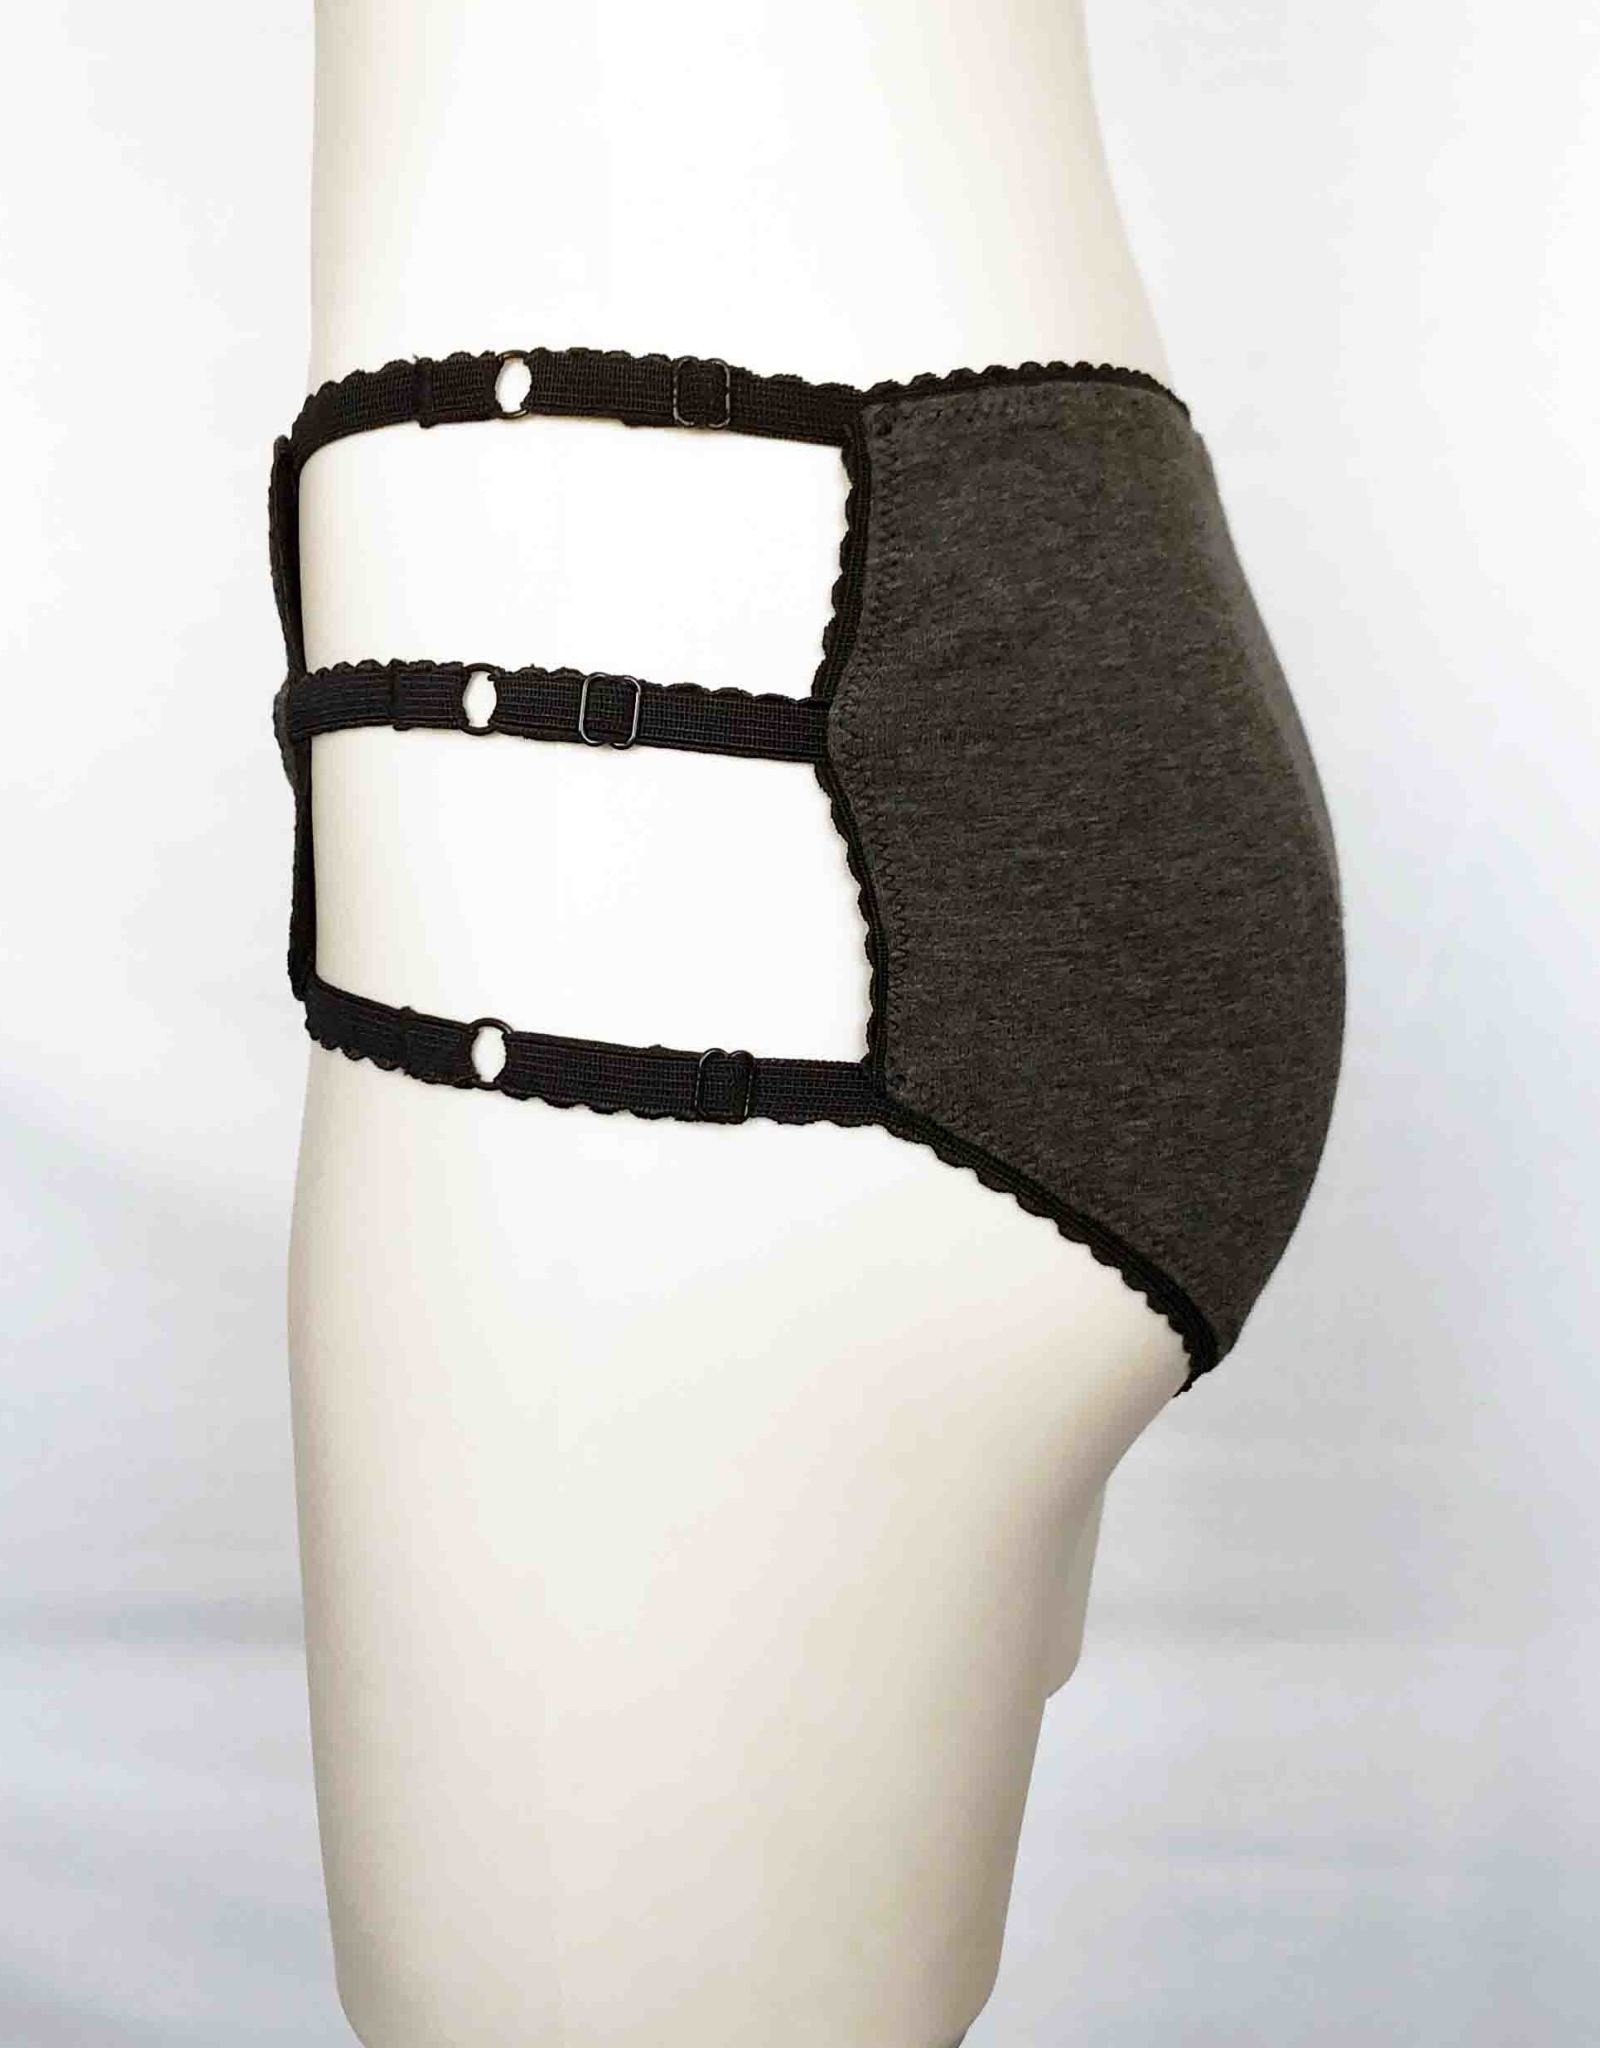 Devil May Wear Cage Panties. Bamboo blend. Adjustable size tabs. Mid Rise. Heather Grey/Black